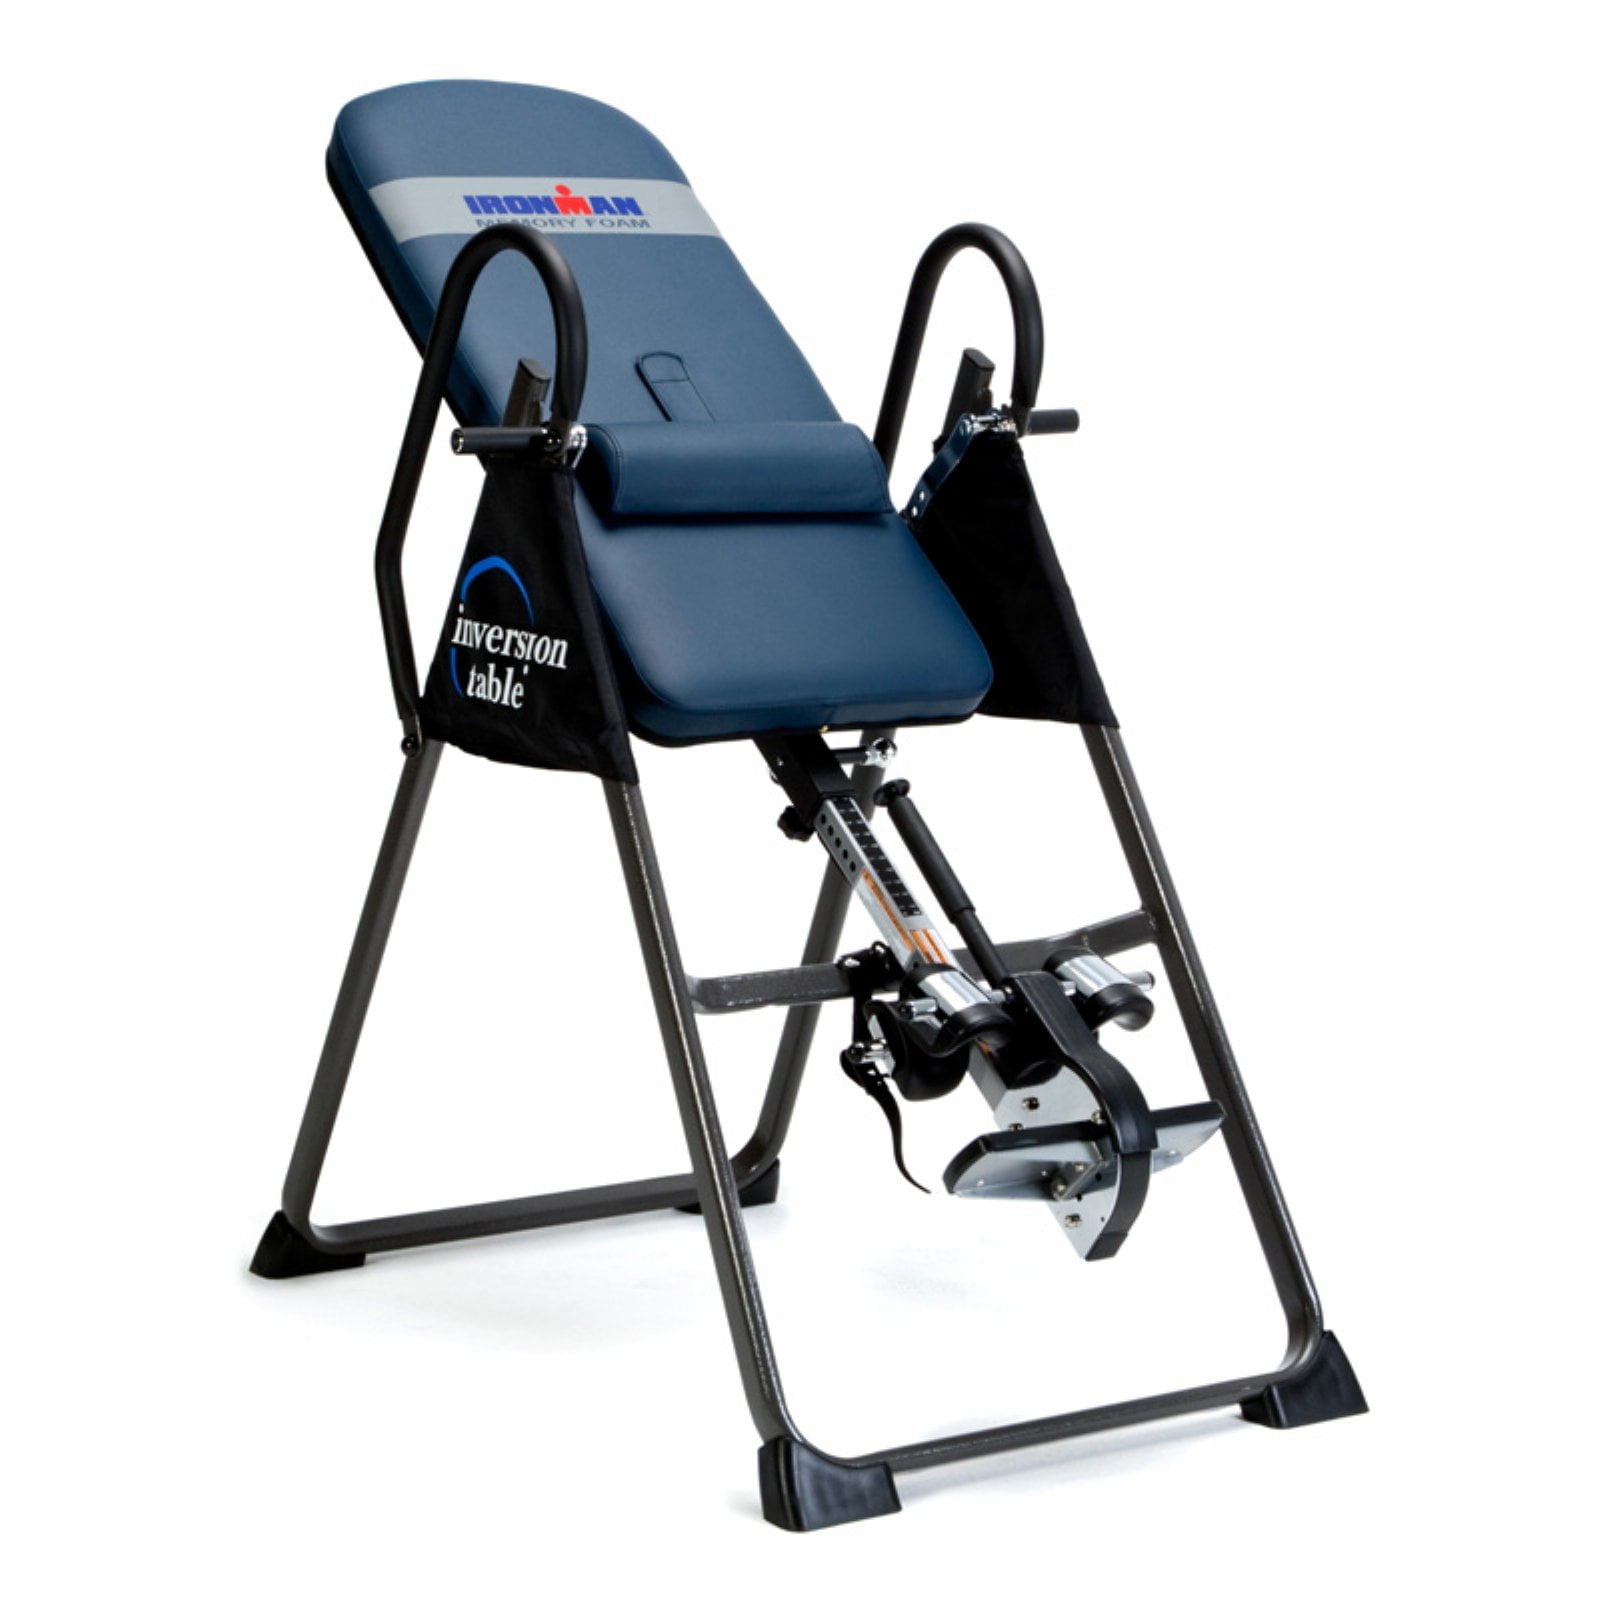 reebok inversion table weight limit